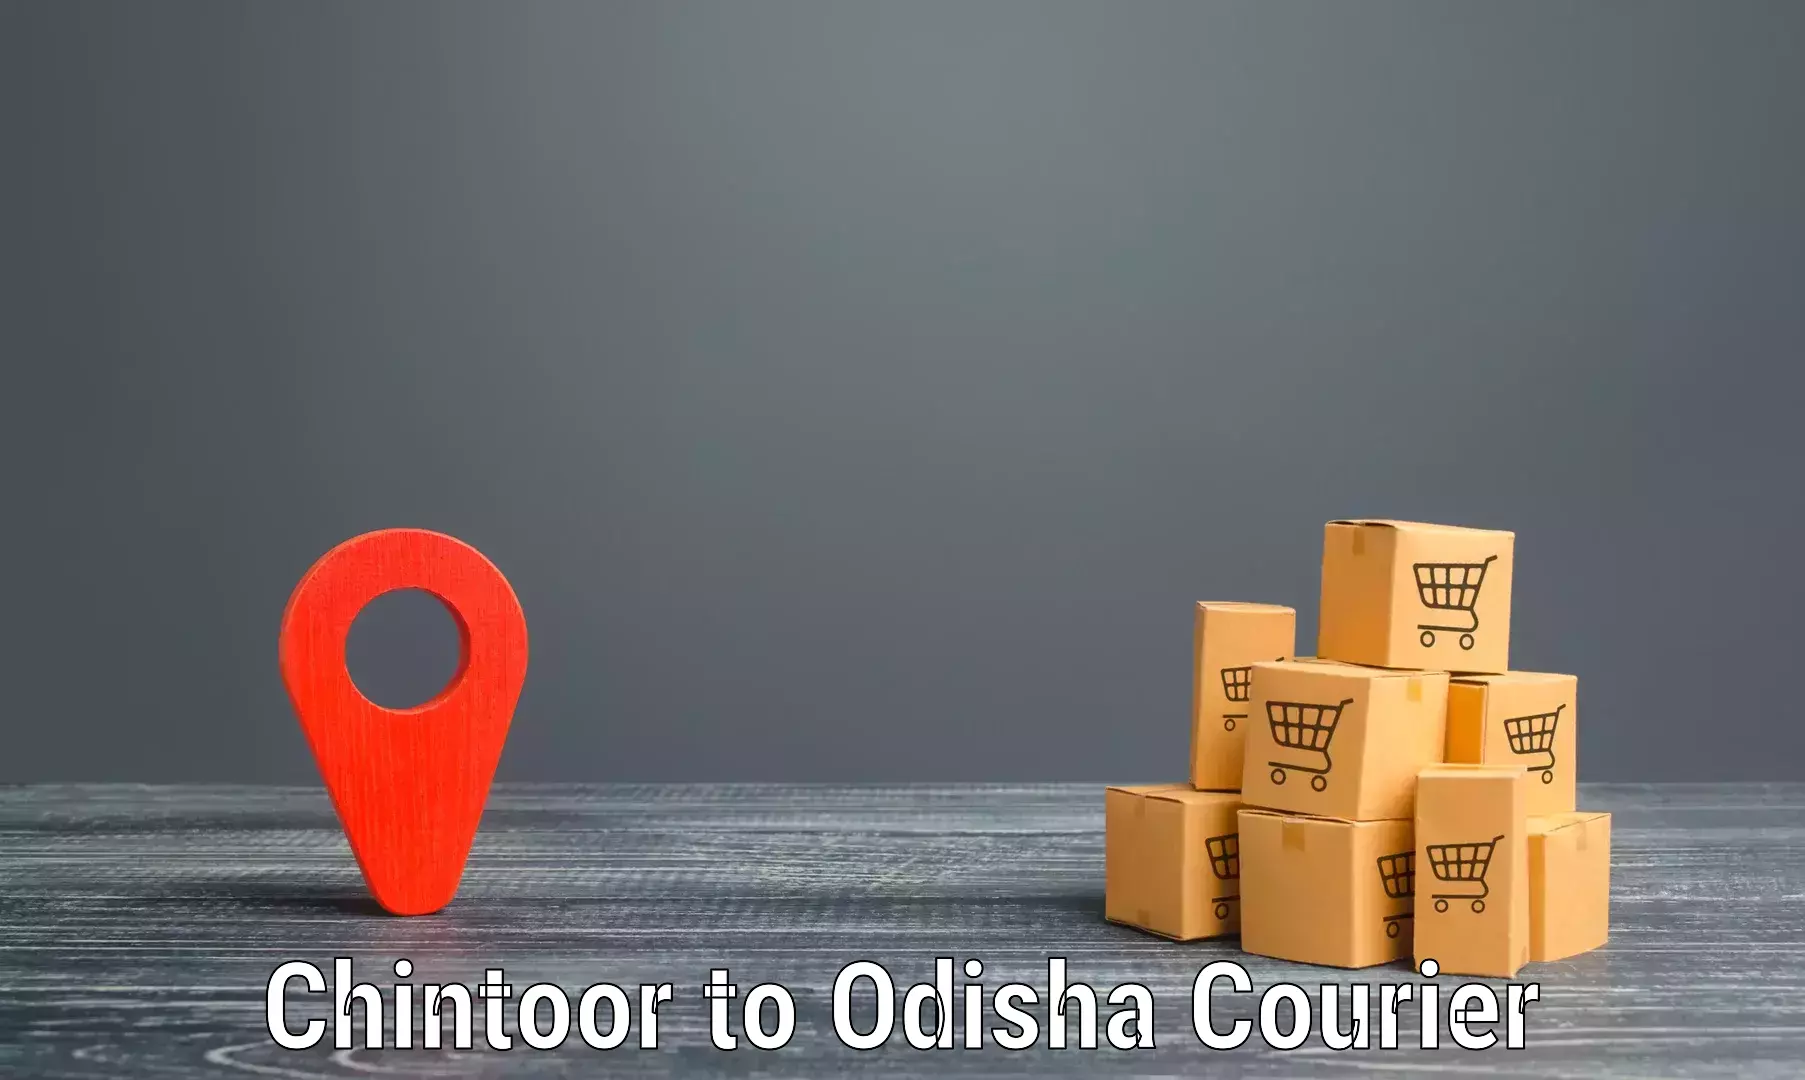 Next-generation courier services Chintoor to Chandipur